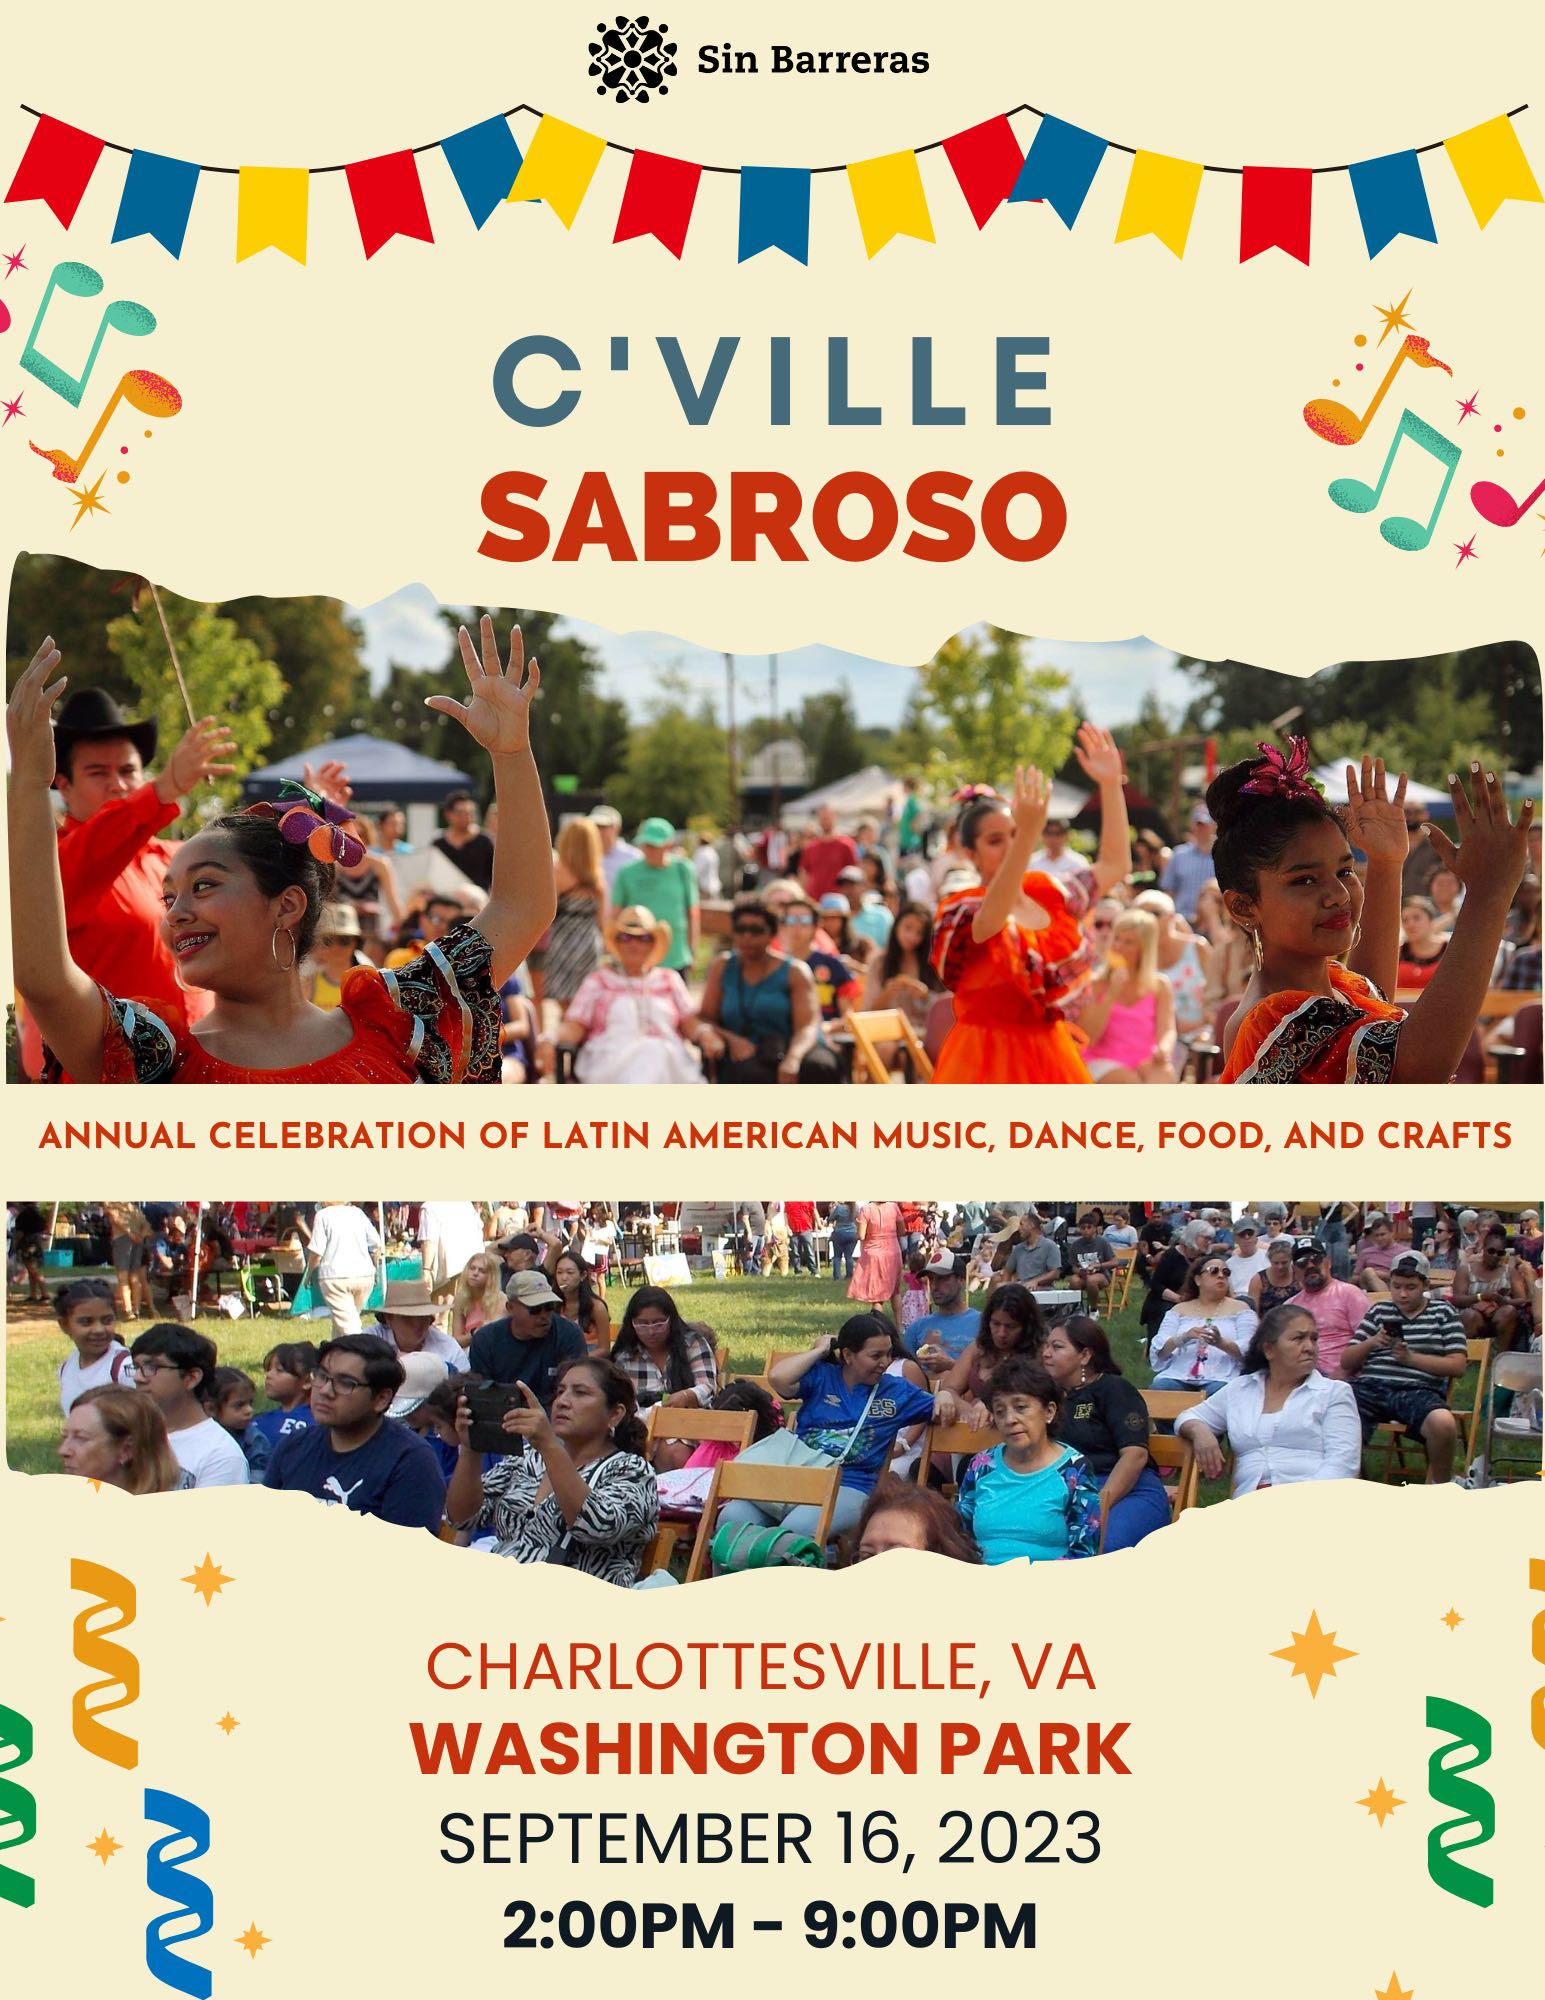 Sin Barreras flyer reading "Sin Barreras C'VILLE SABROSO -- ANNUAL CELEBRATION OF LATIN AMERICAN MUSIC, DANCE, FOOD, AND CRAFTS -- CHARLOTTESVILLE, VA WASHINGTON PARK SEPTEMBER 16, 2023 2:00PM-9:00PM". There is a photo of performers and a photo of attendees from past festivals.